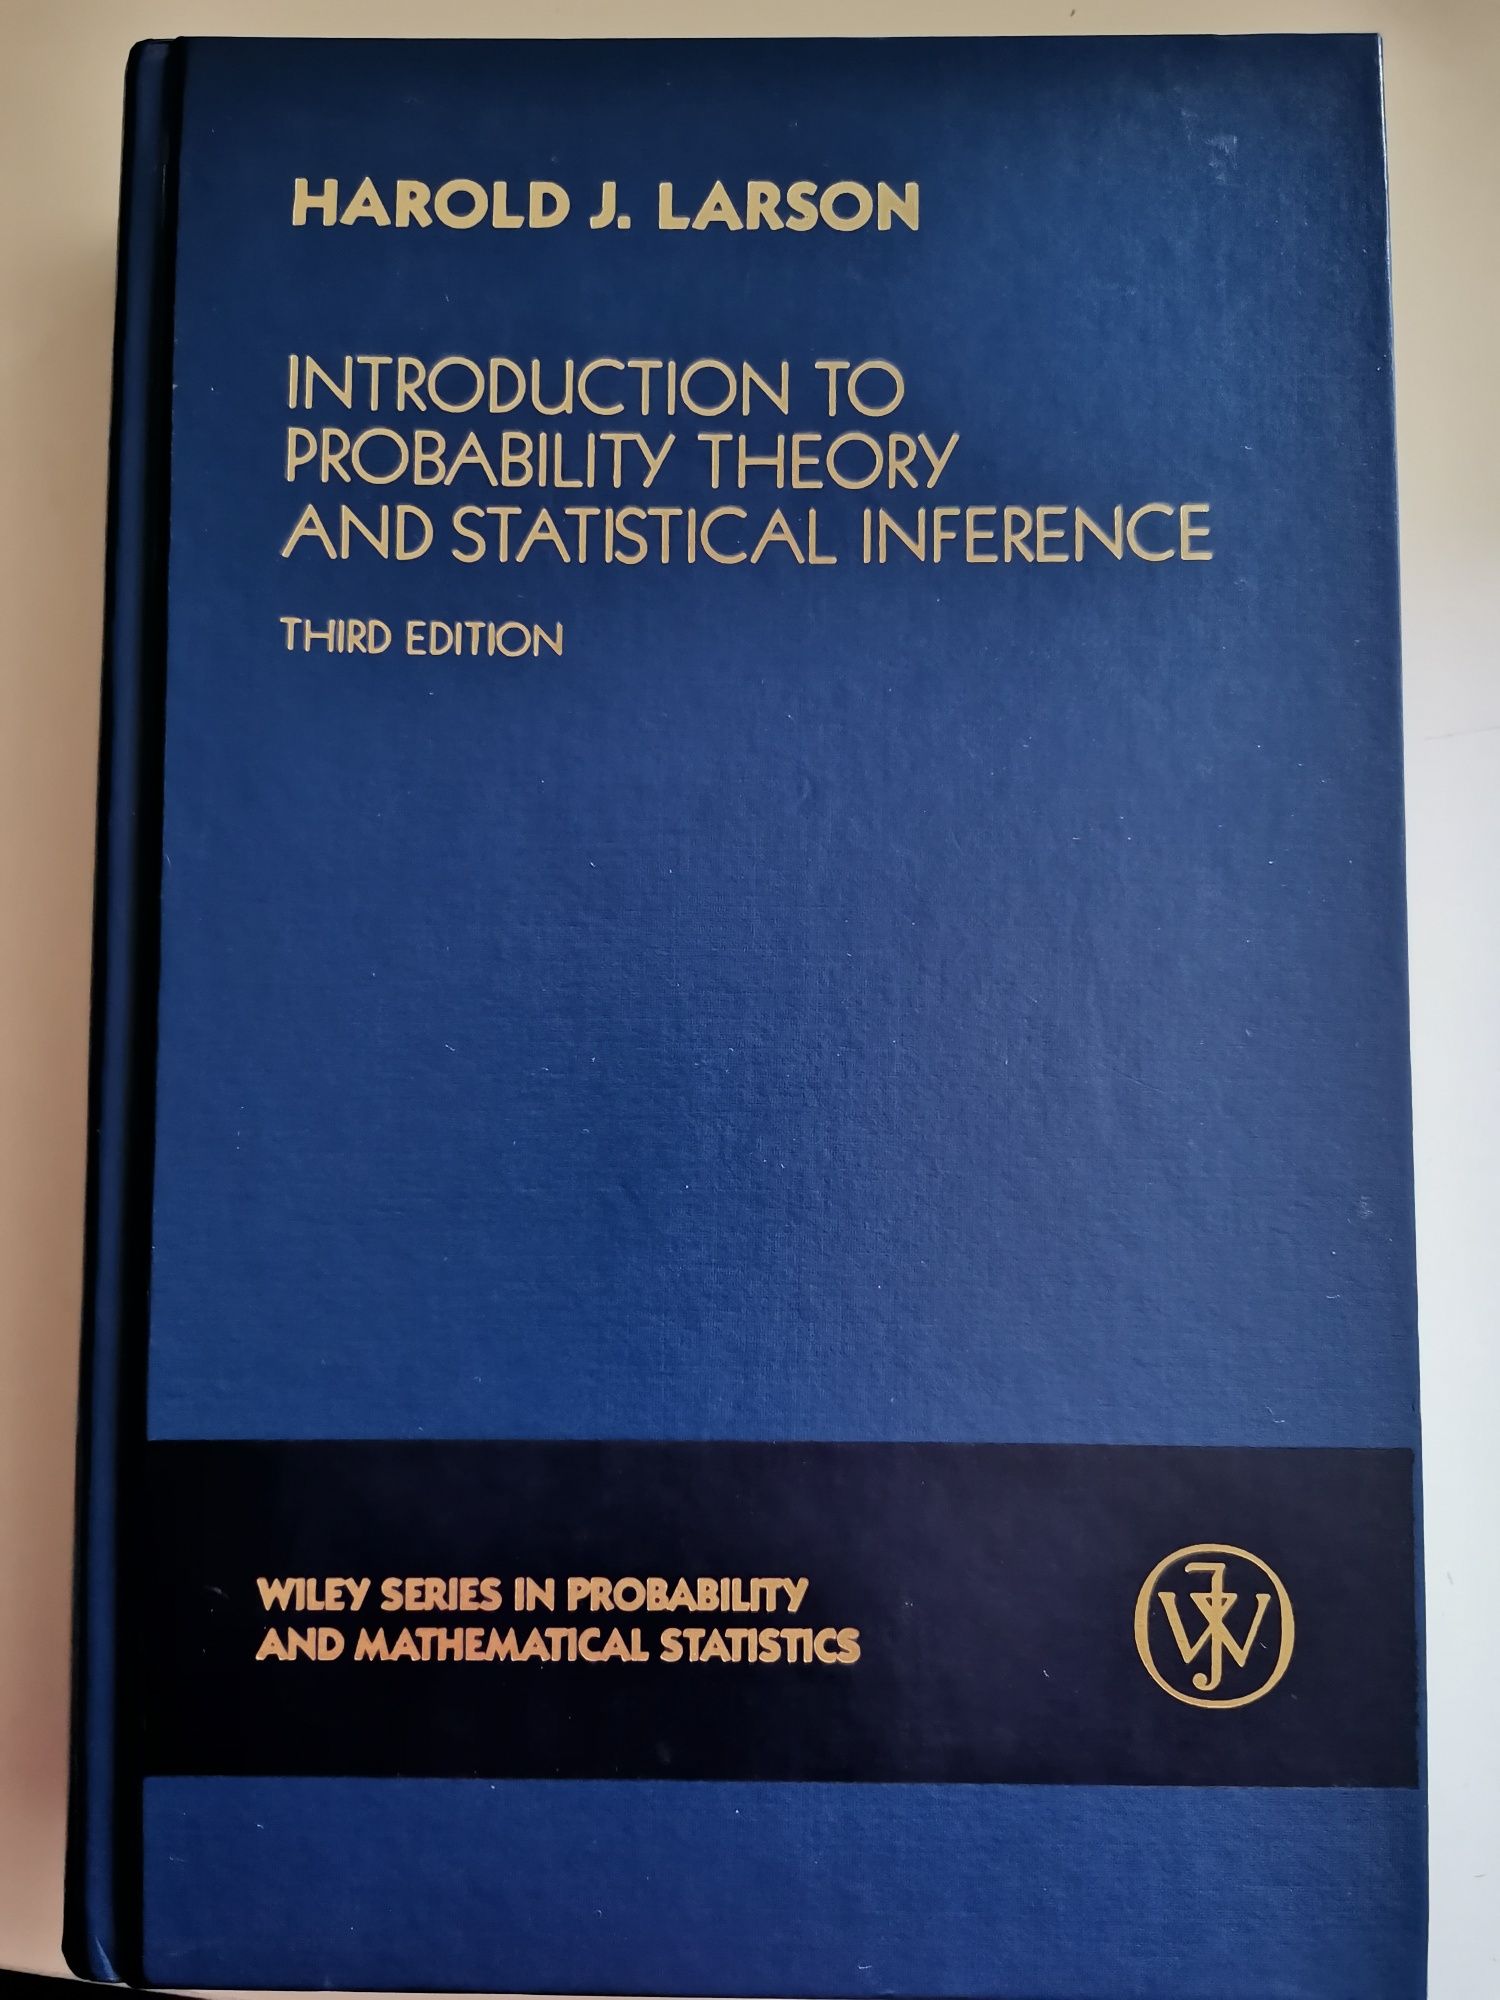 Introduction to probability theory and statistical Inference